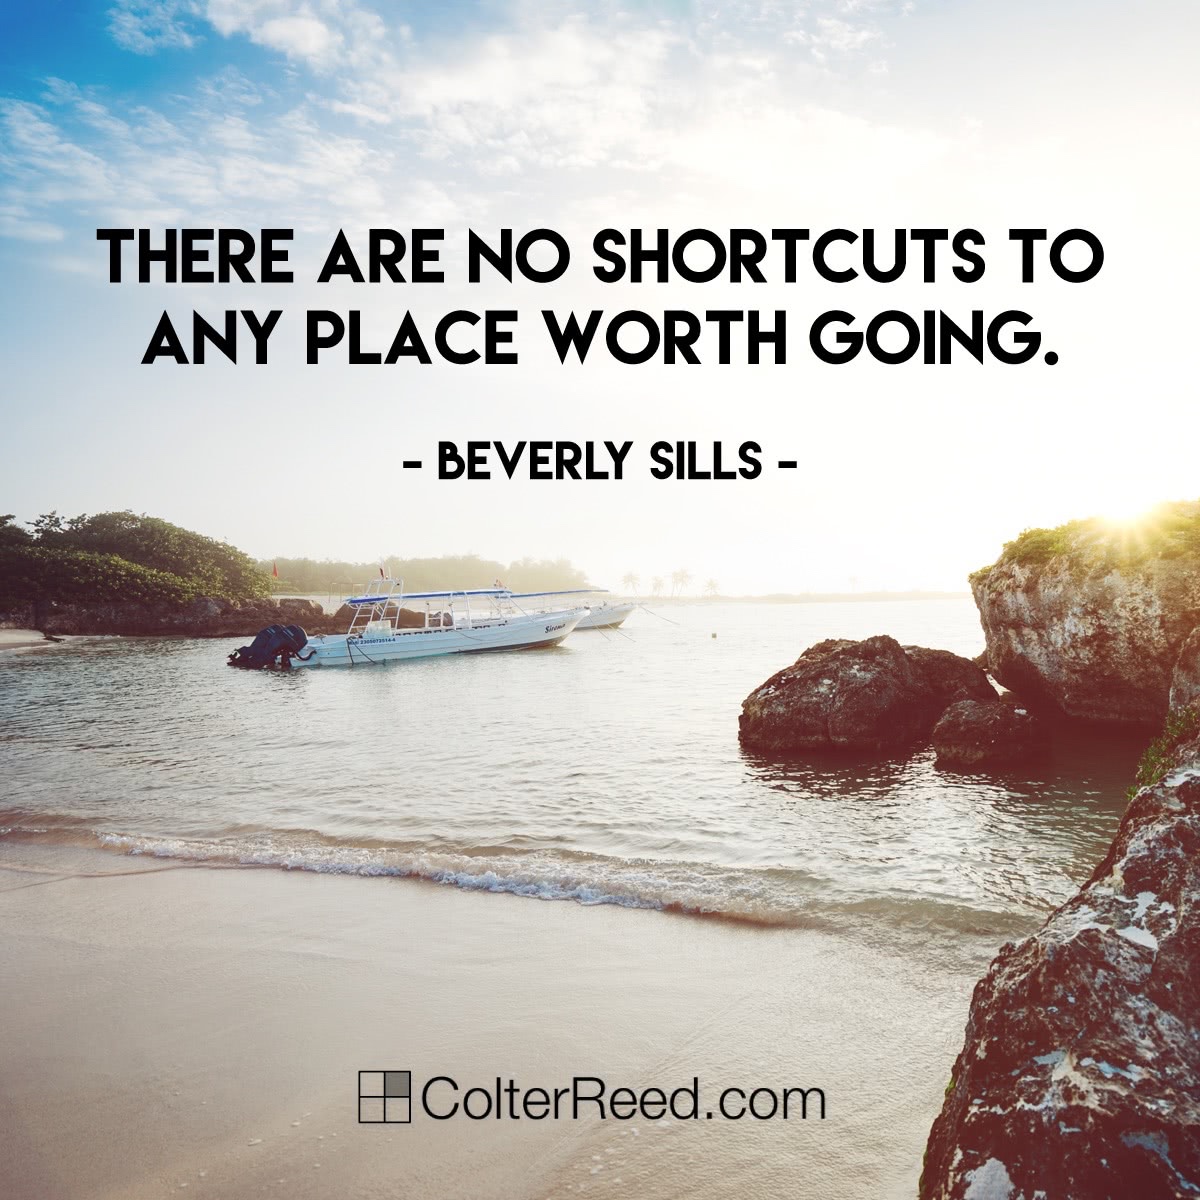 “There are no shortcuts to any place worth going.” —Beverly Sills